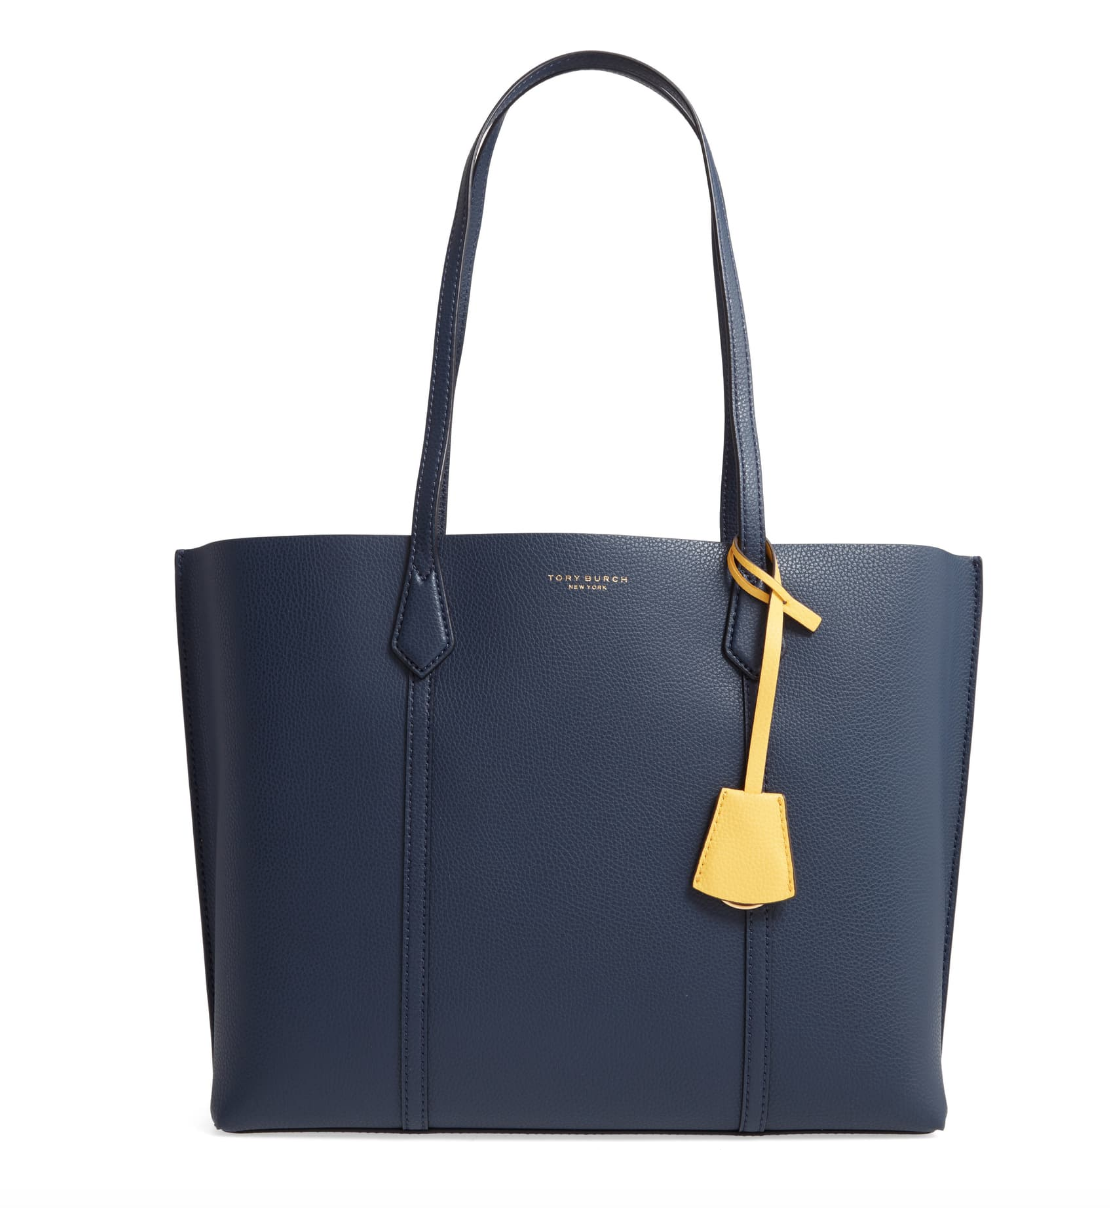 Tory Burch Perry Leather Tote - $348 from Nordstrom